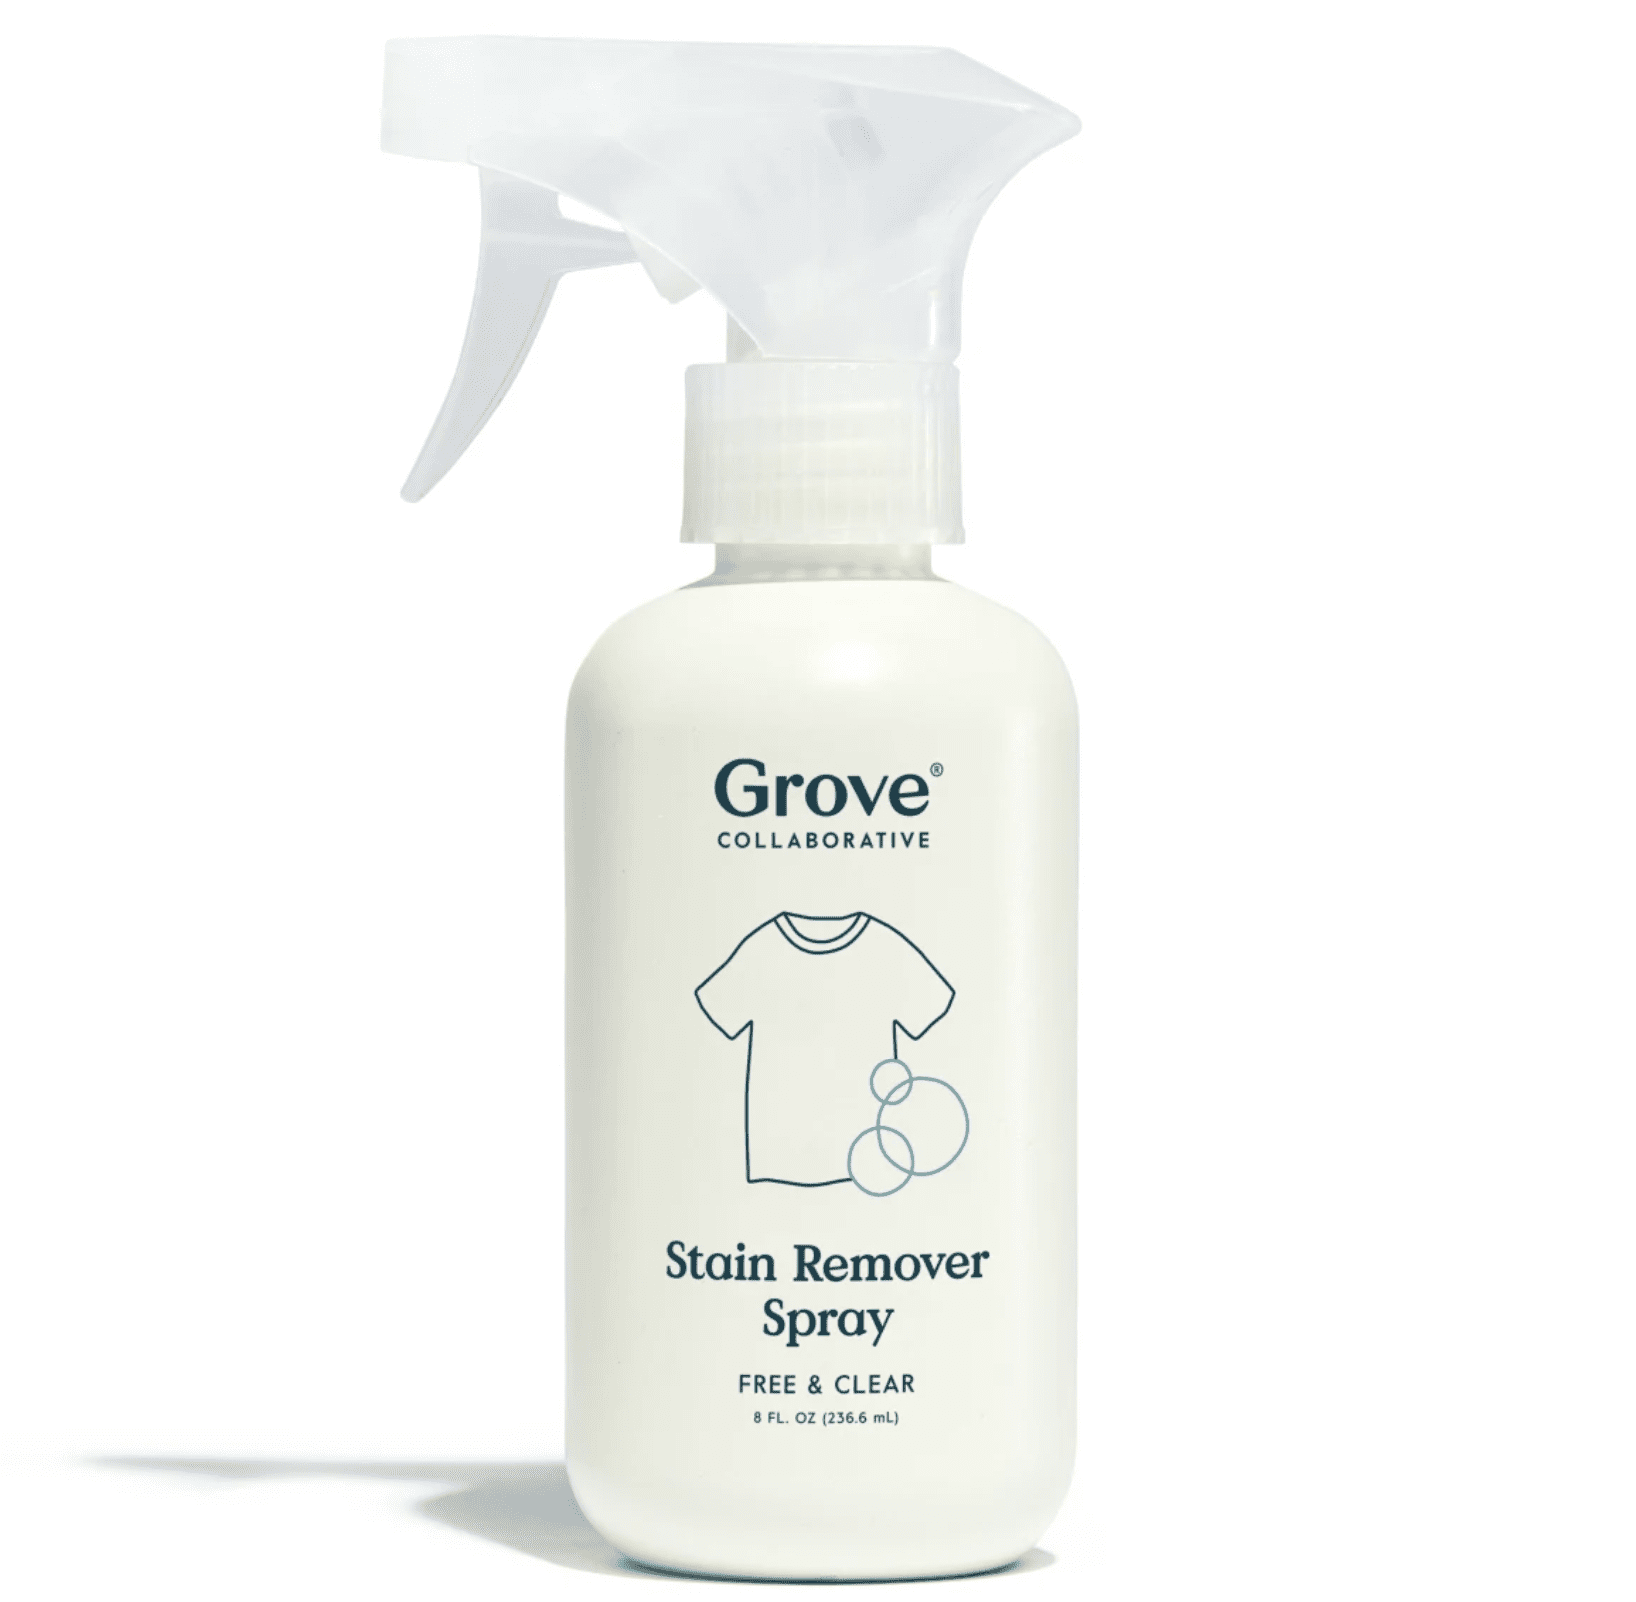 The 10 Best Laundry Stain Removers of 2023, Tested and Reviewed